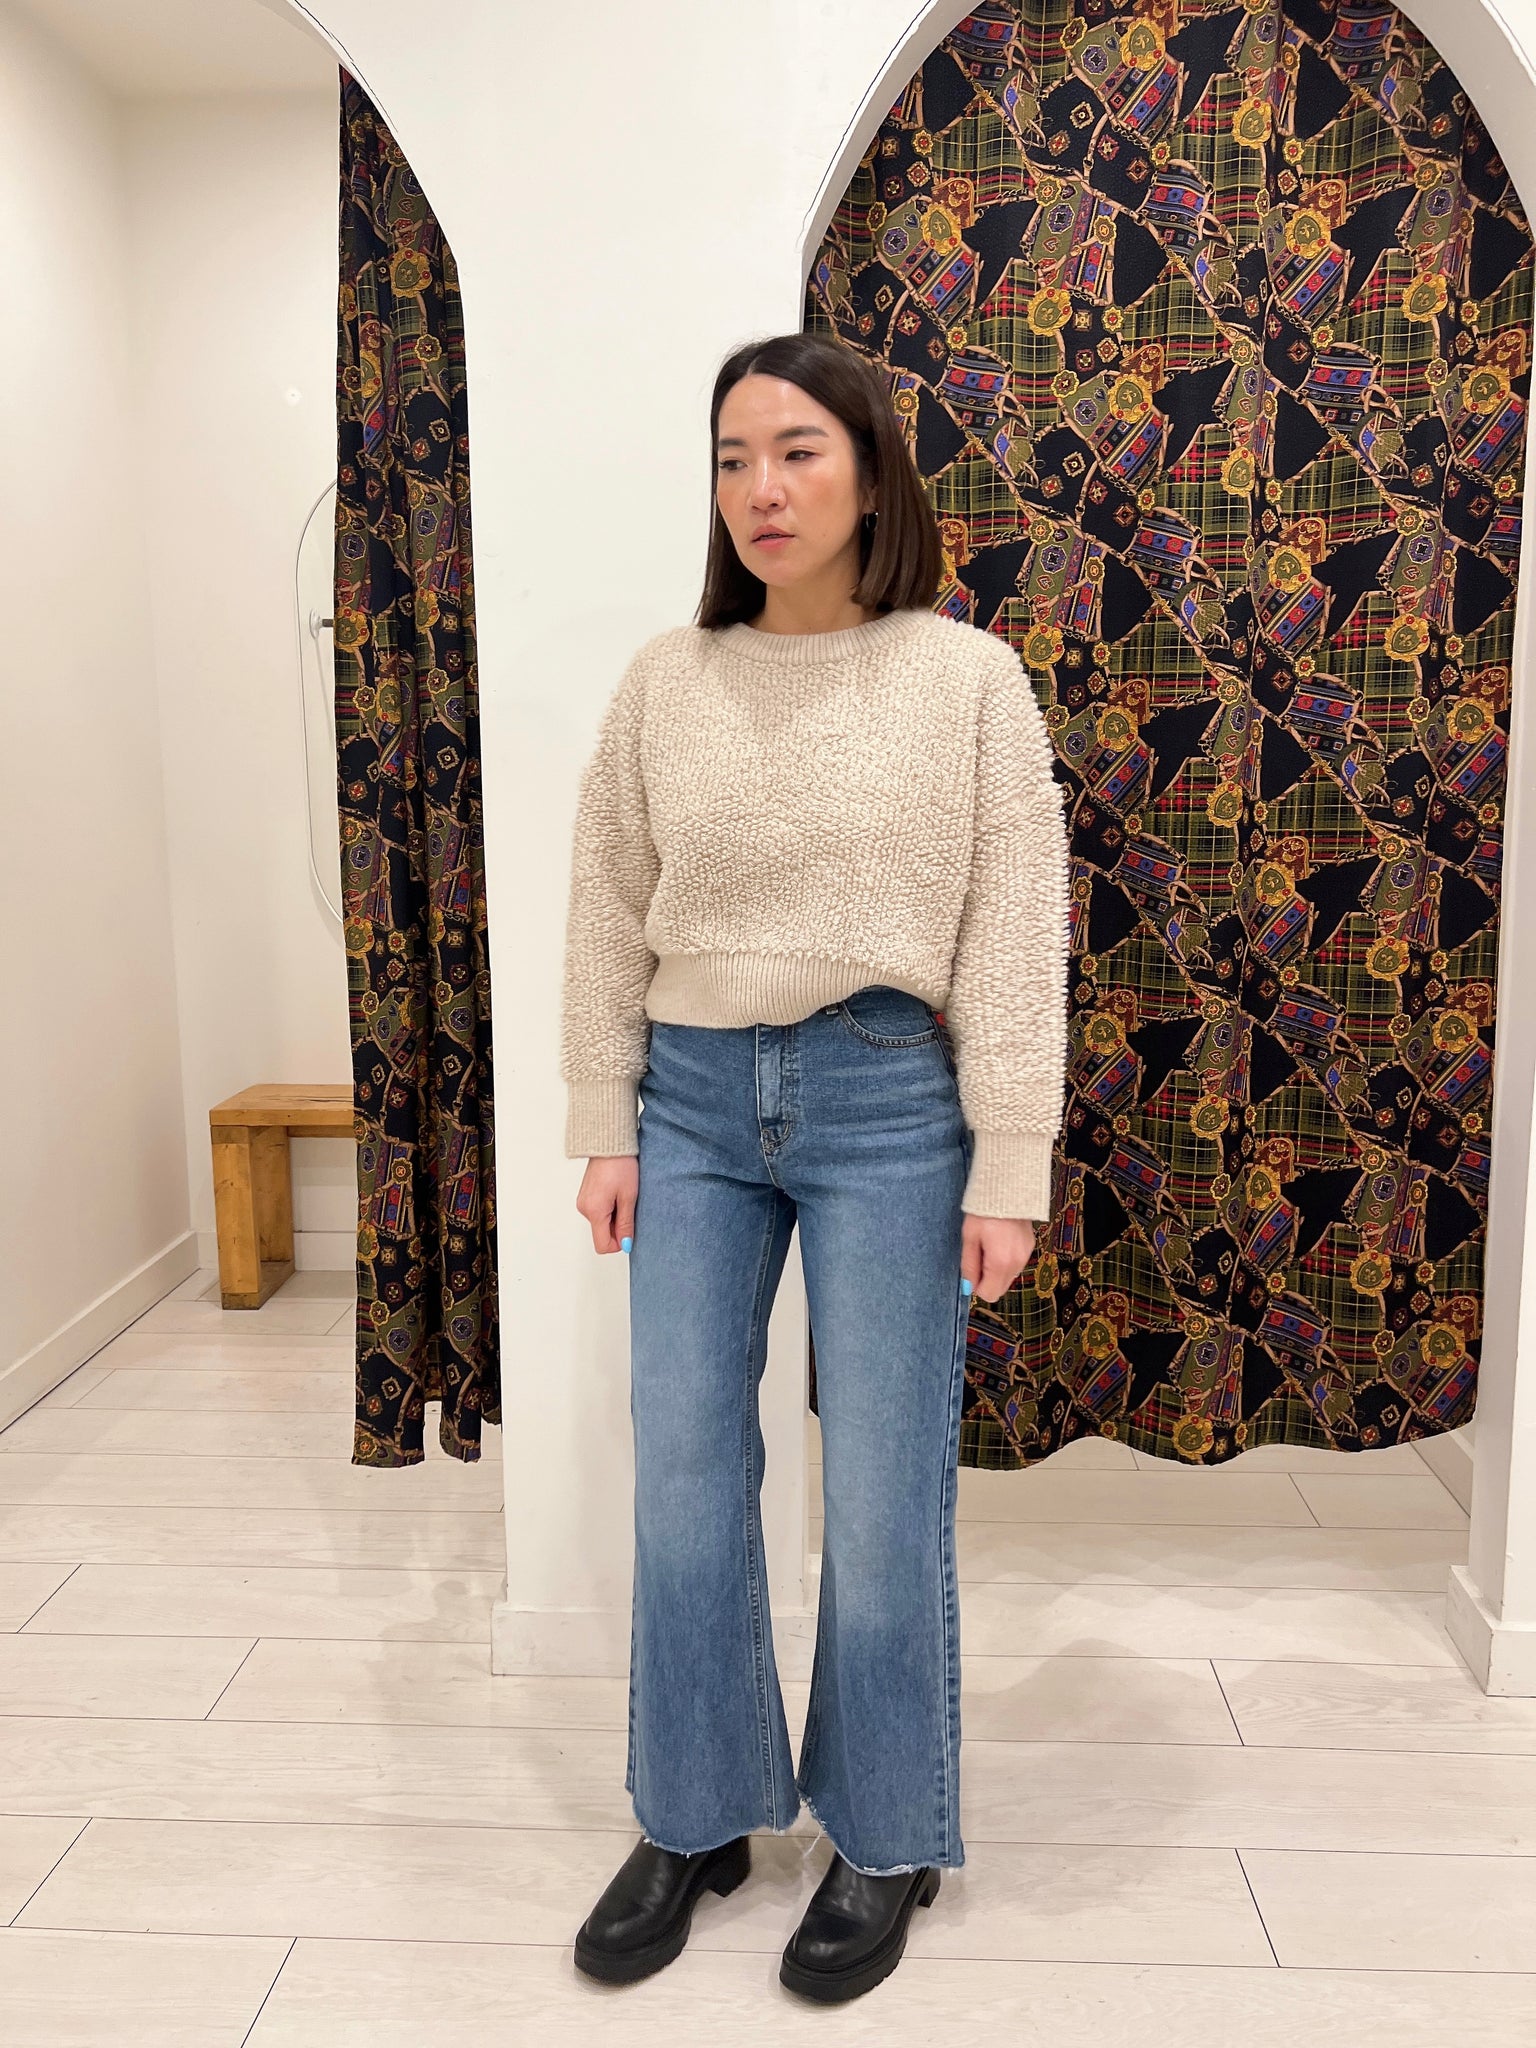 Get the look: bouclé sweater and wide-leg trousers